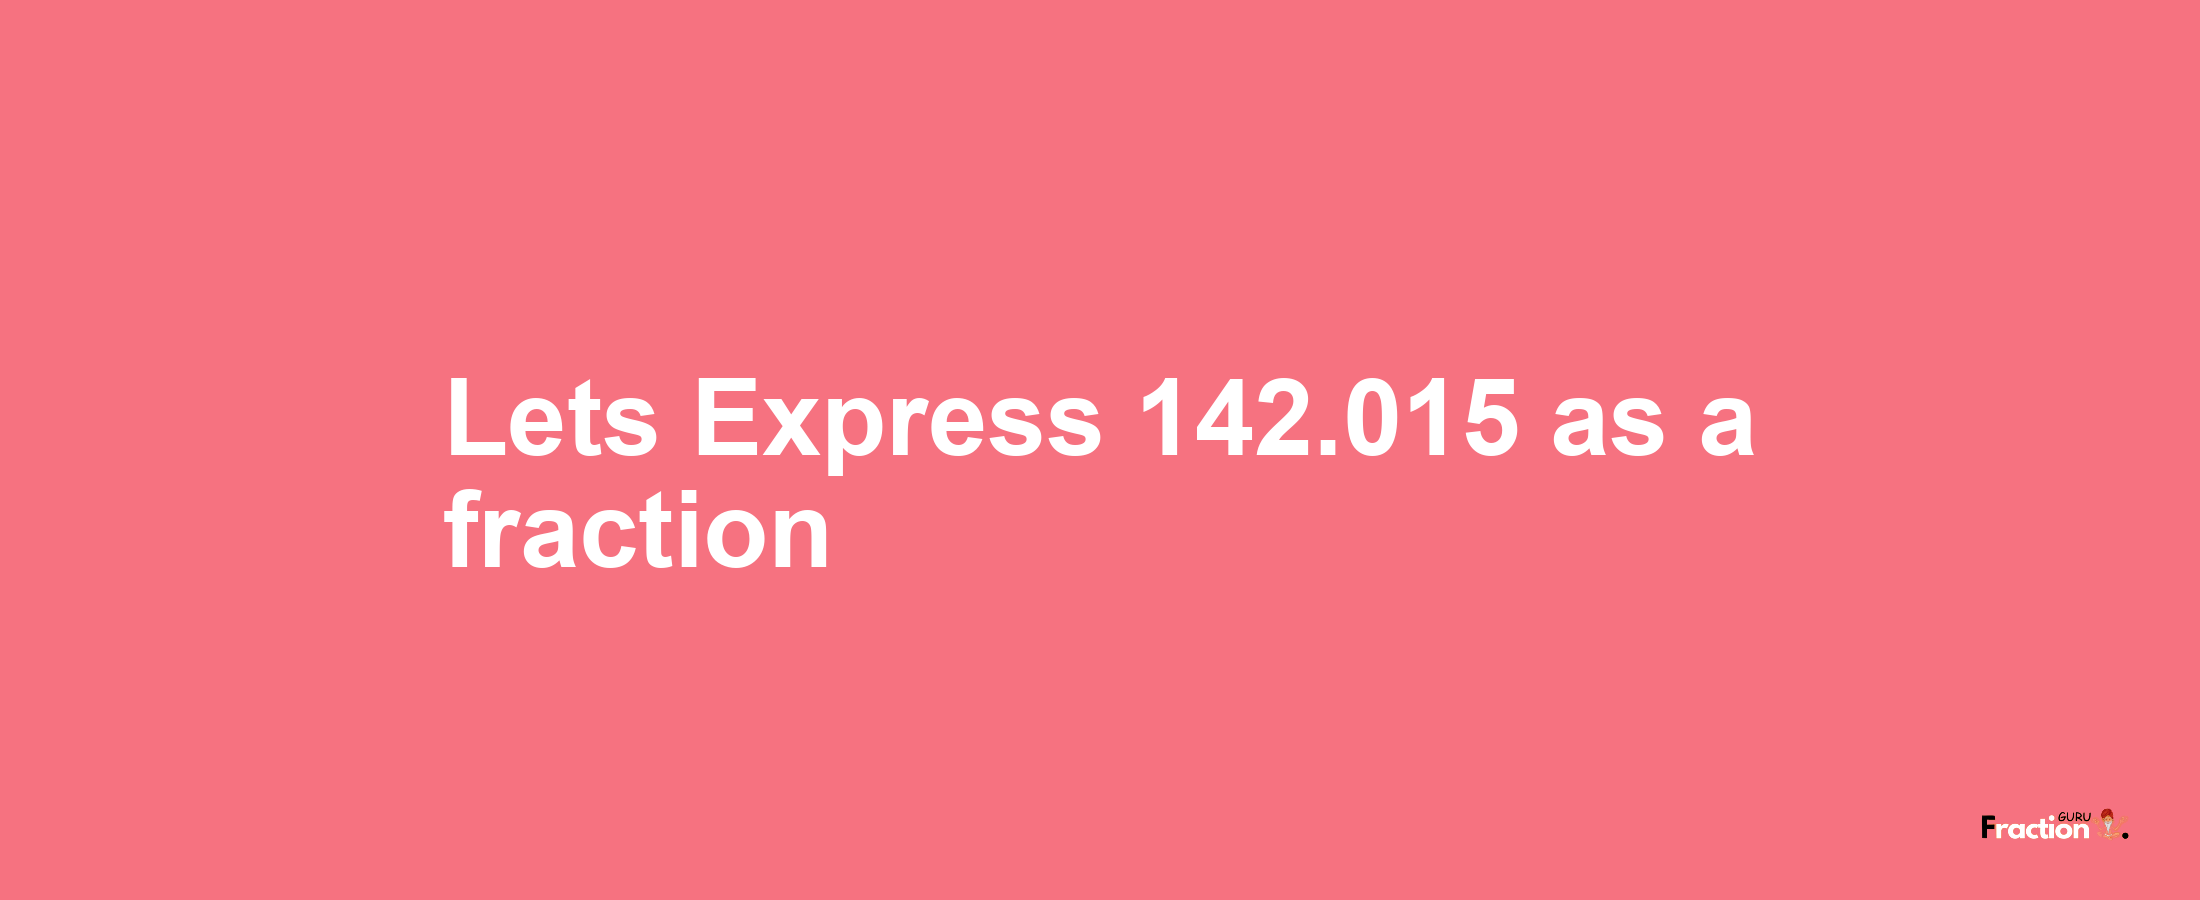 Lets Express 142.015 as afraction